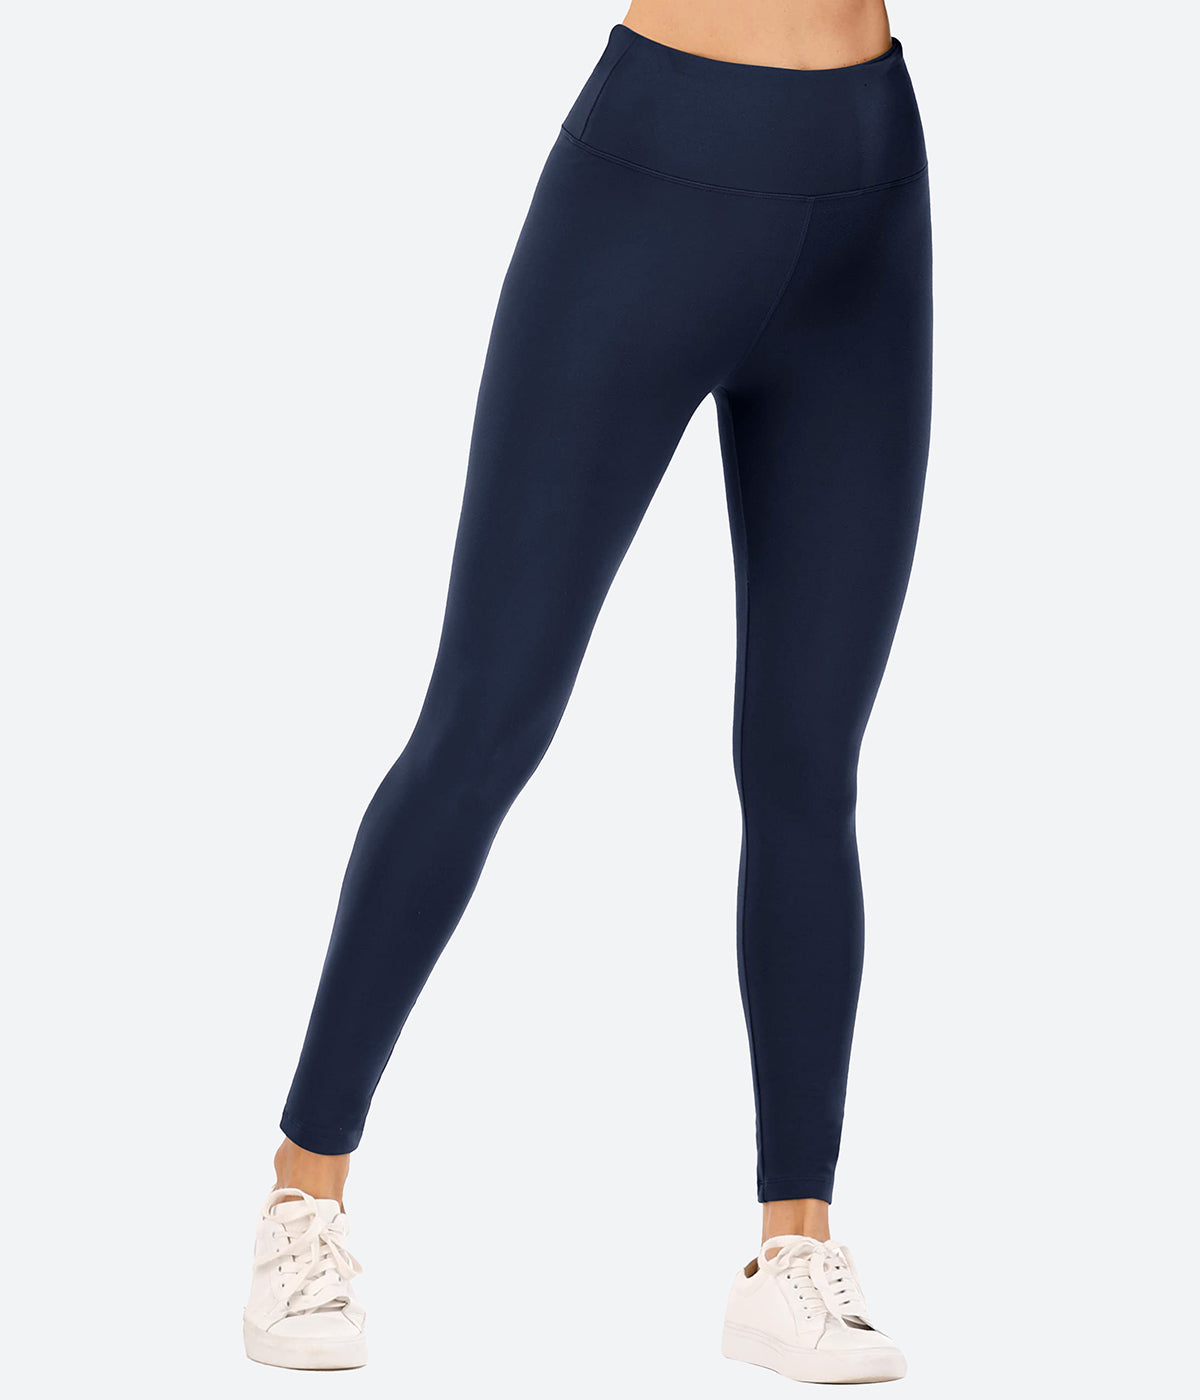 High Waisted Yoga Pants for Women with Pockets Leggings for Women Yoga Pants  NEW